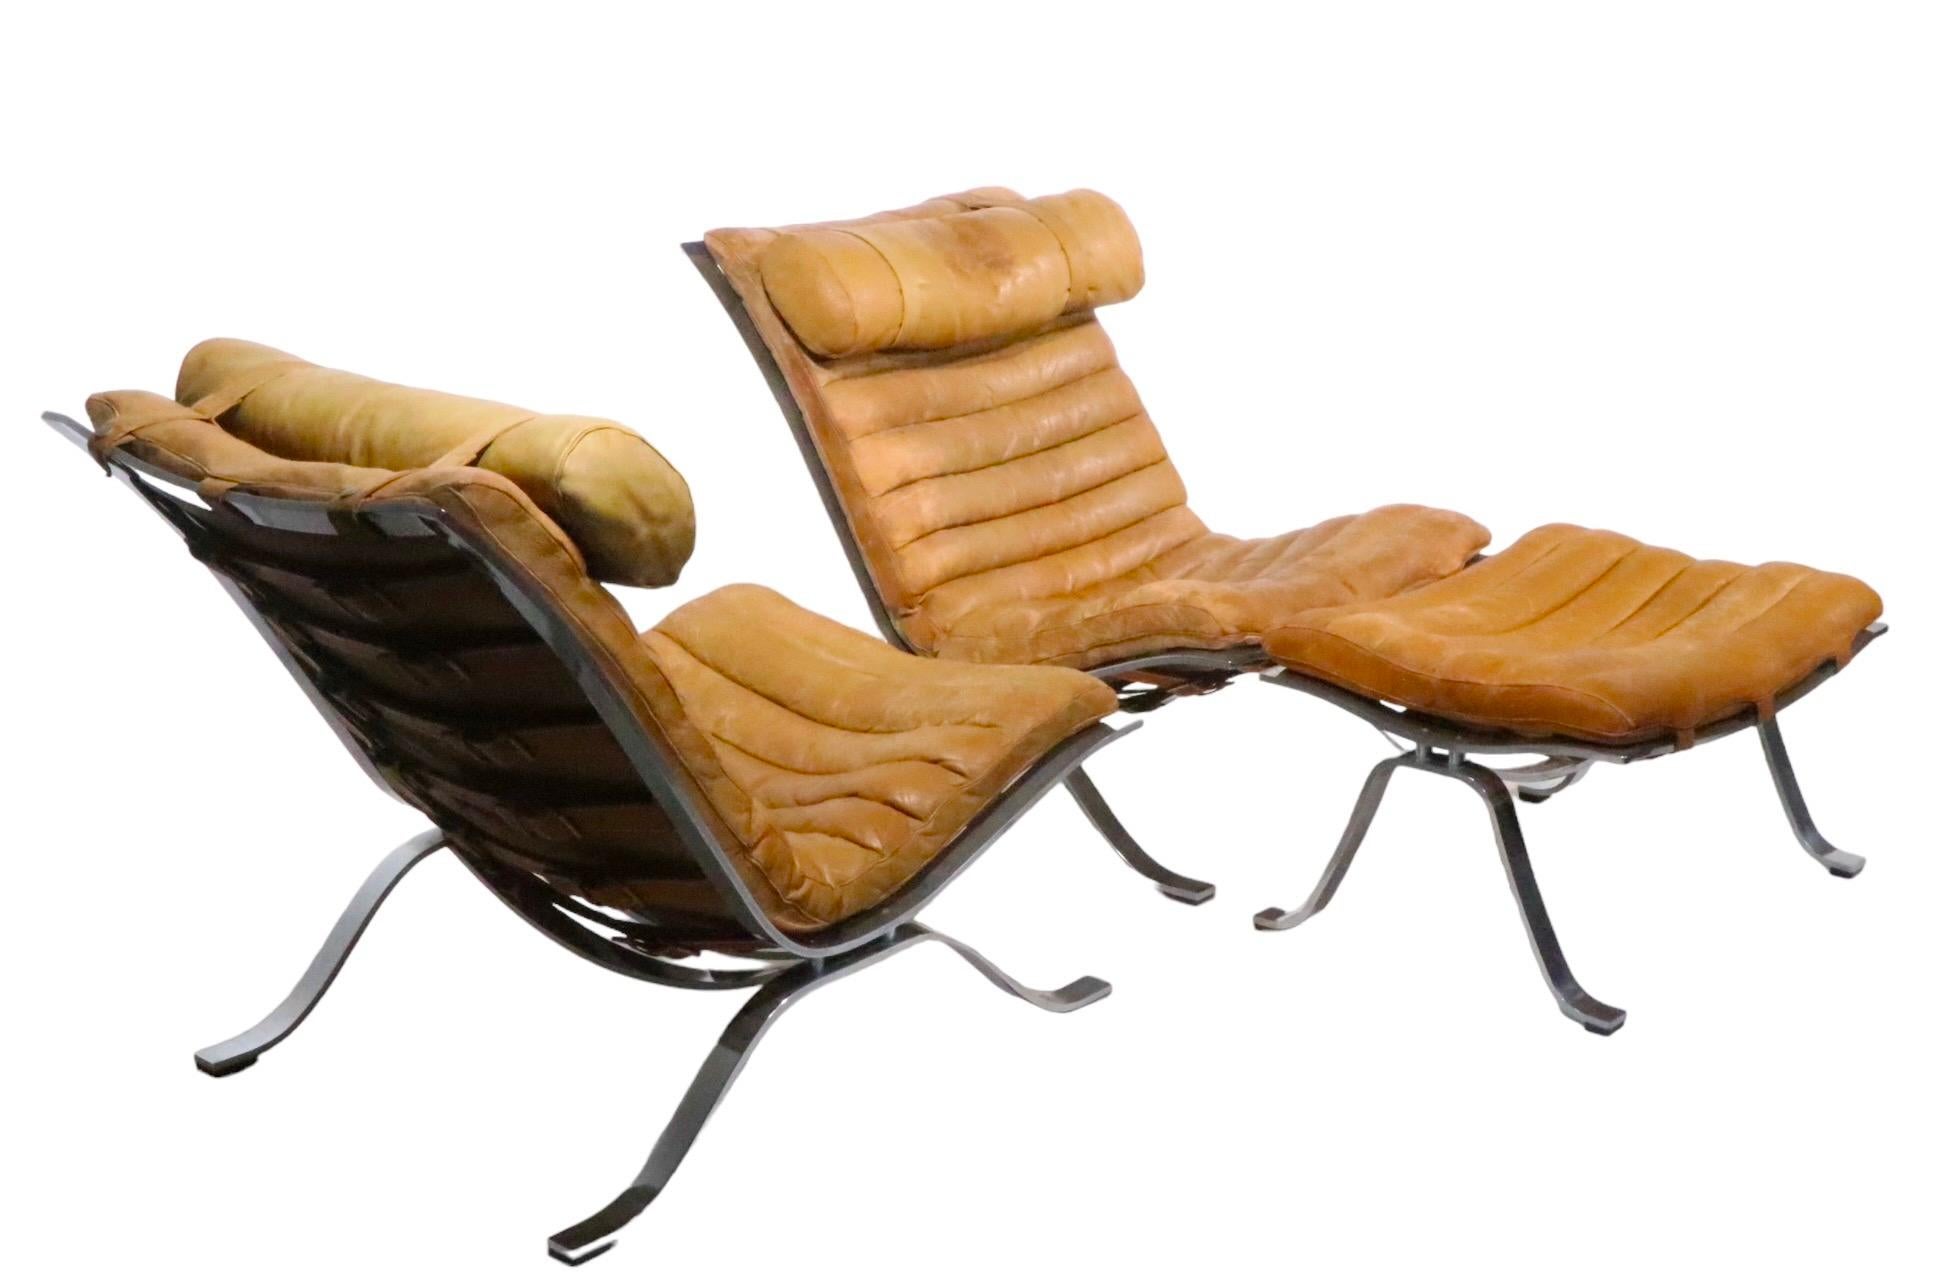 Pr. Ari Lounge Chairs with Ottomans by Arne Norell Made in Sweden c. 1960's For Sale 9